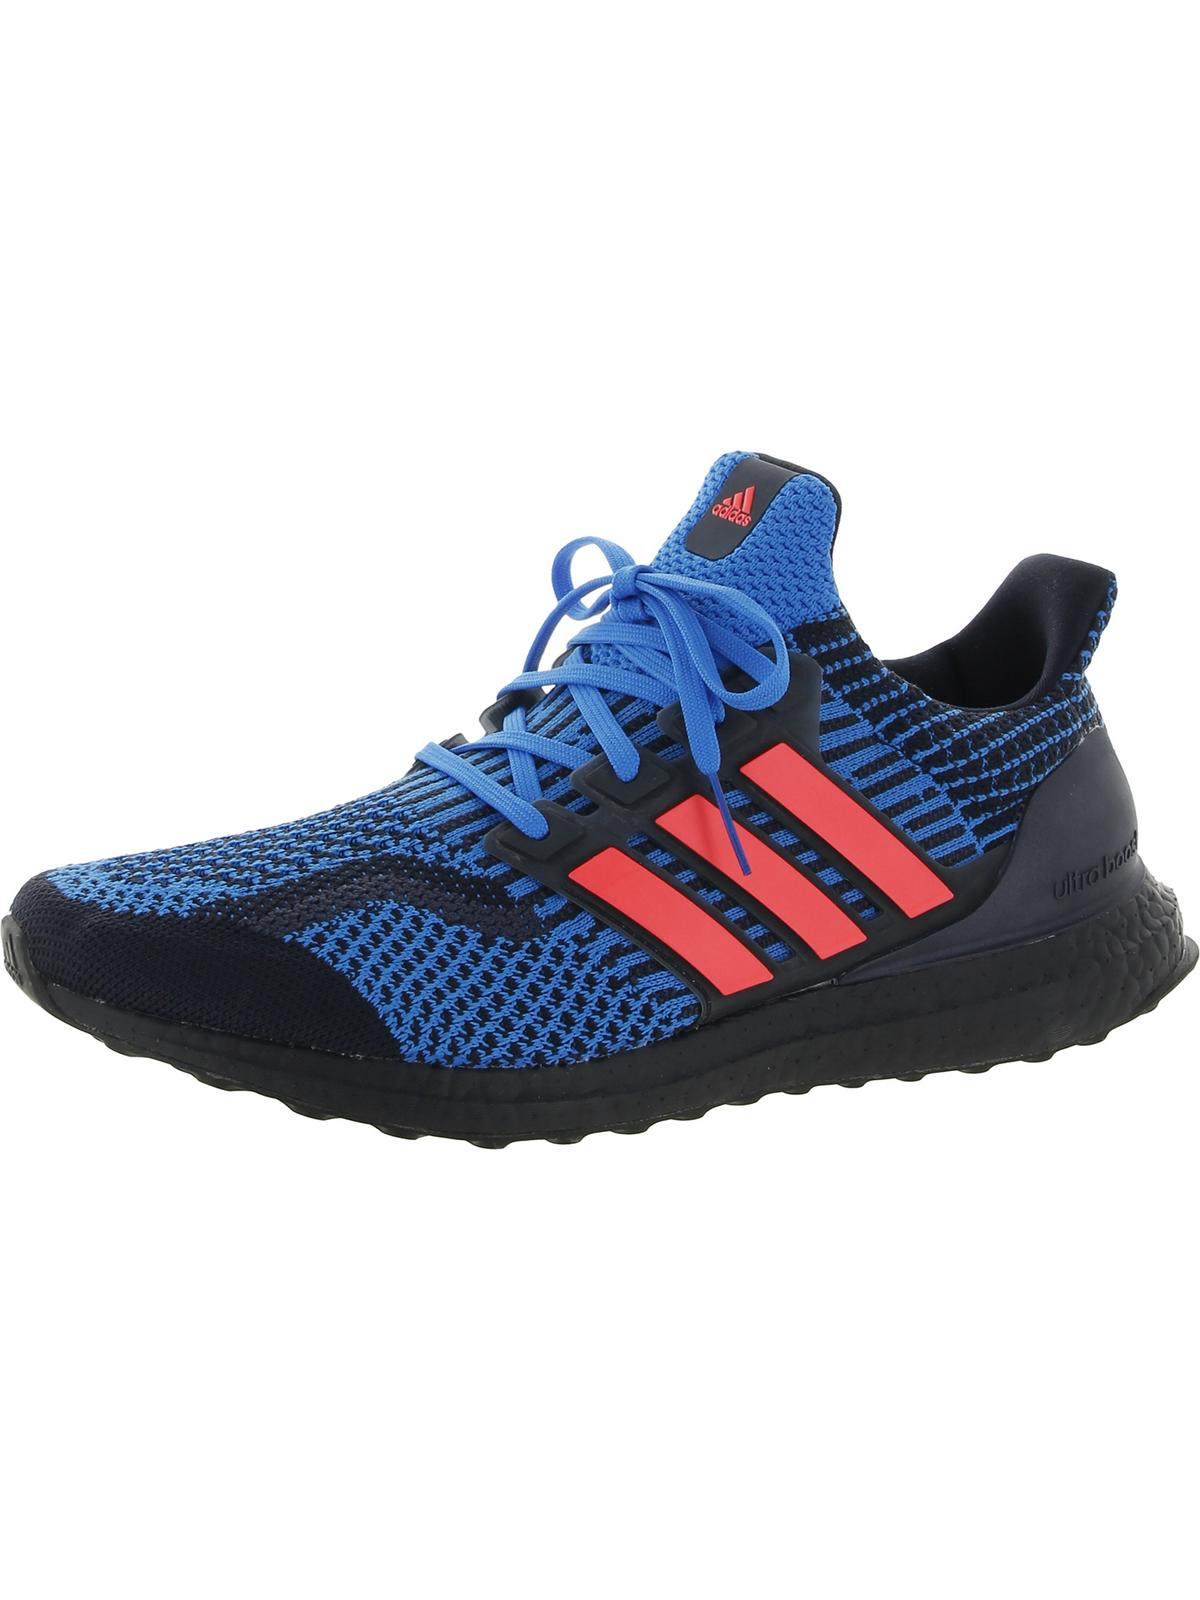 ADIDAS ORIGINALS Ultraboost 5.0 DNA Mens Knit Trainers Running Shoes